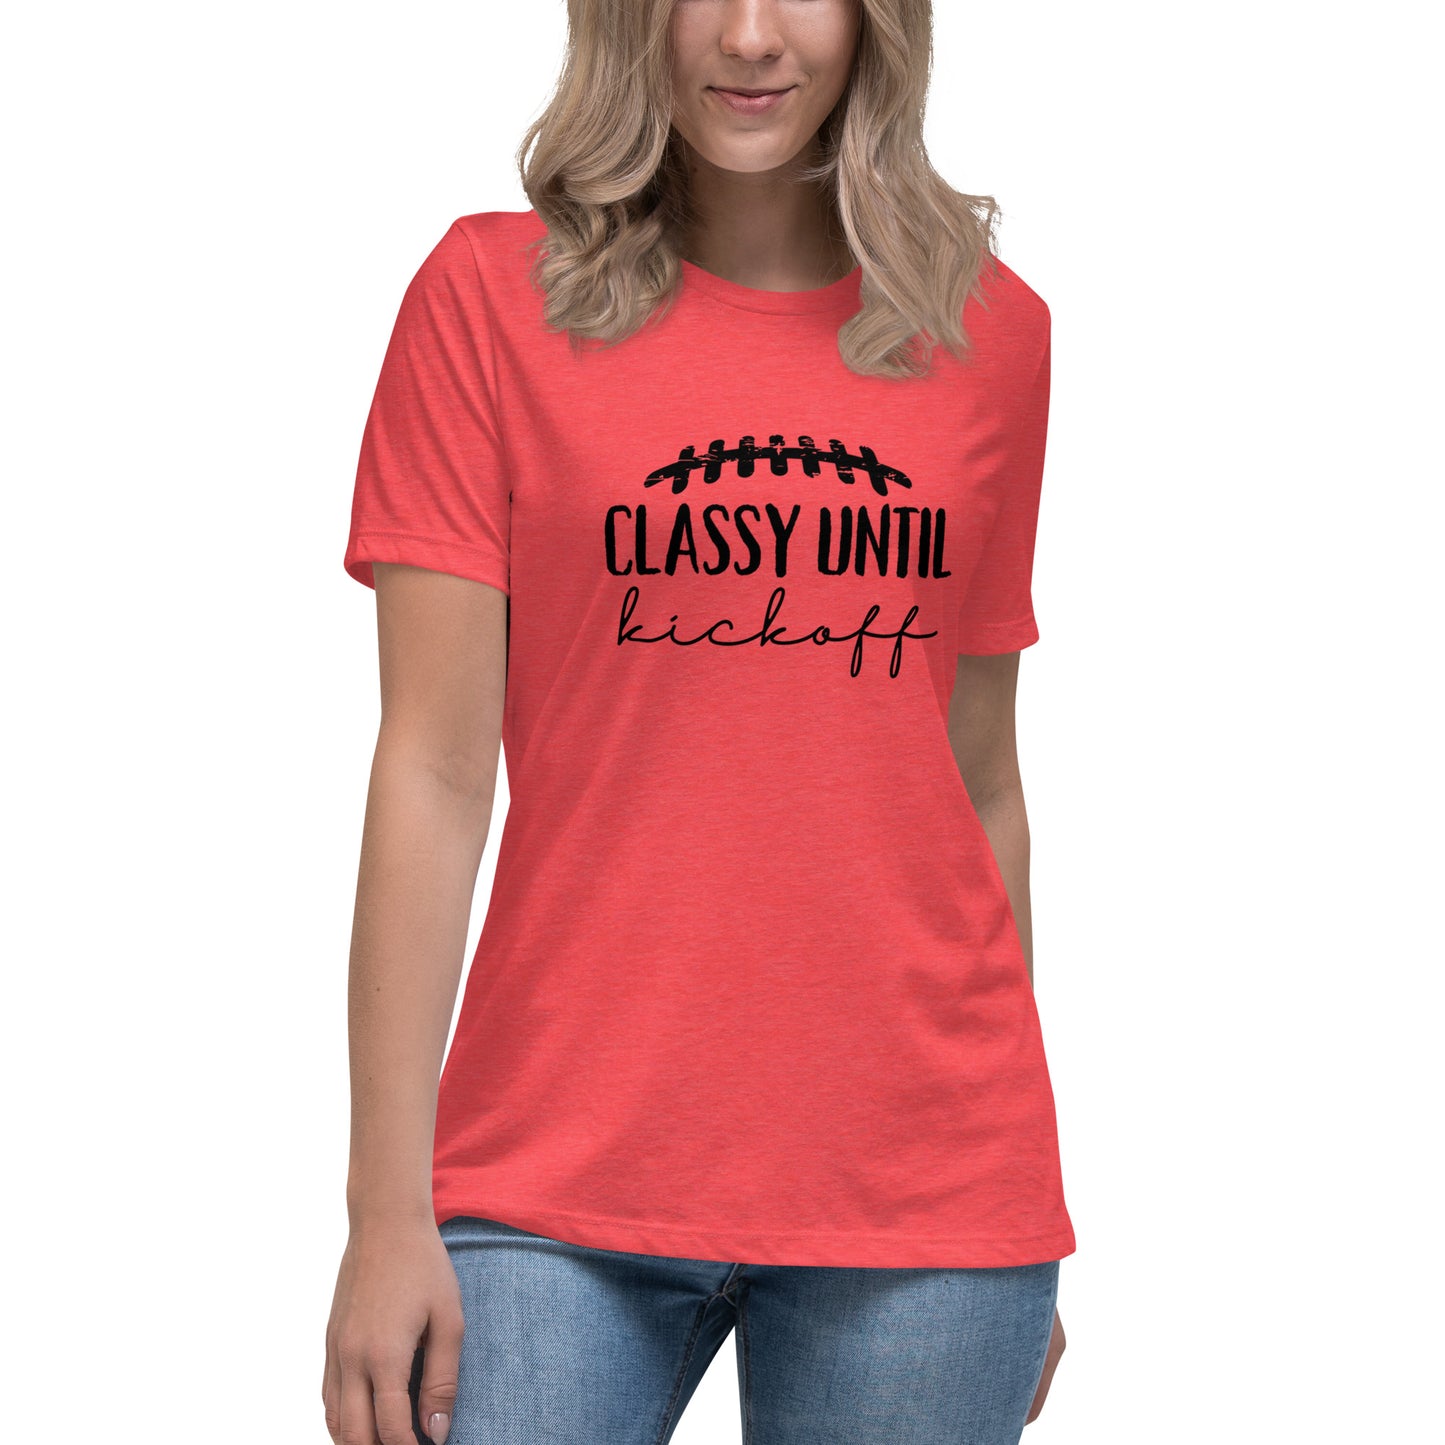 "Classy until kickoff" Women's Relaxed T-Shirt